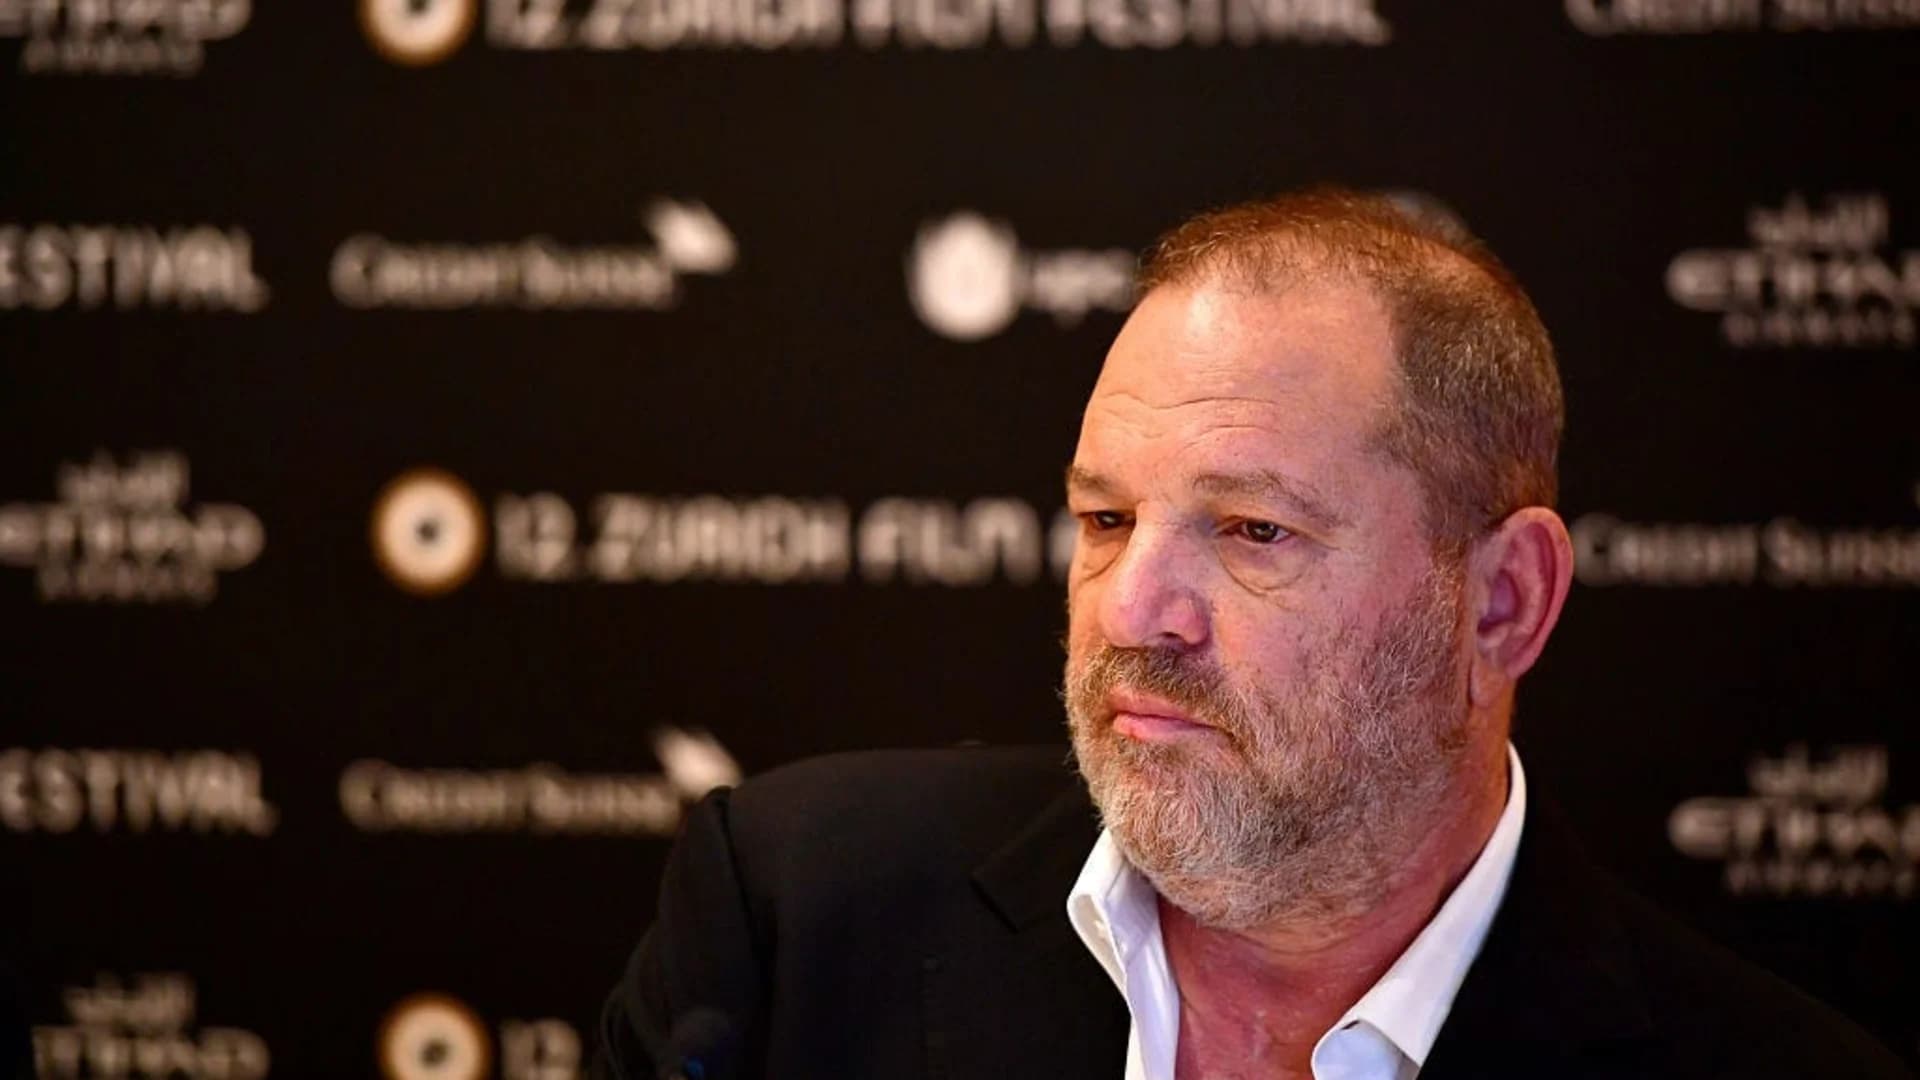 NYPD says it is building rape case against Harvey Weinstein